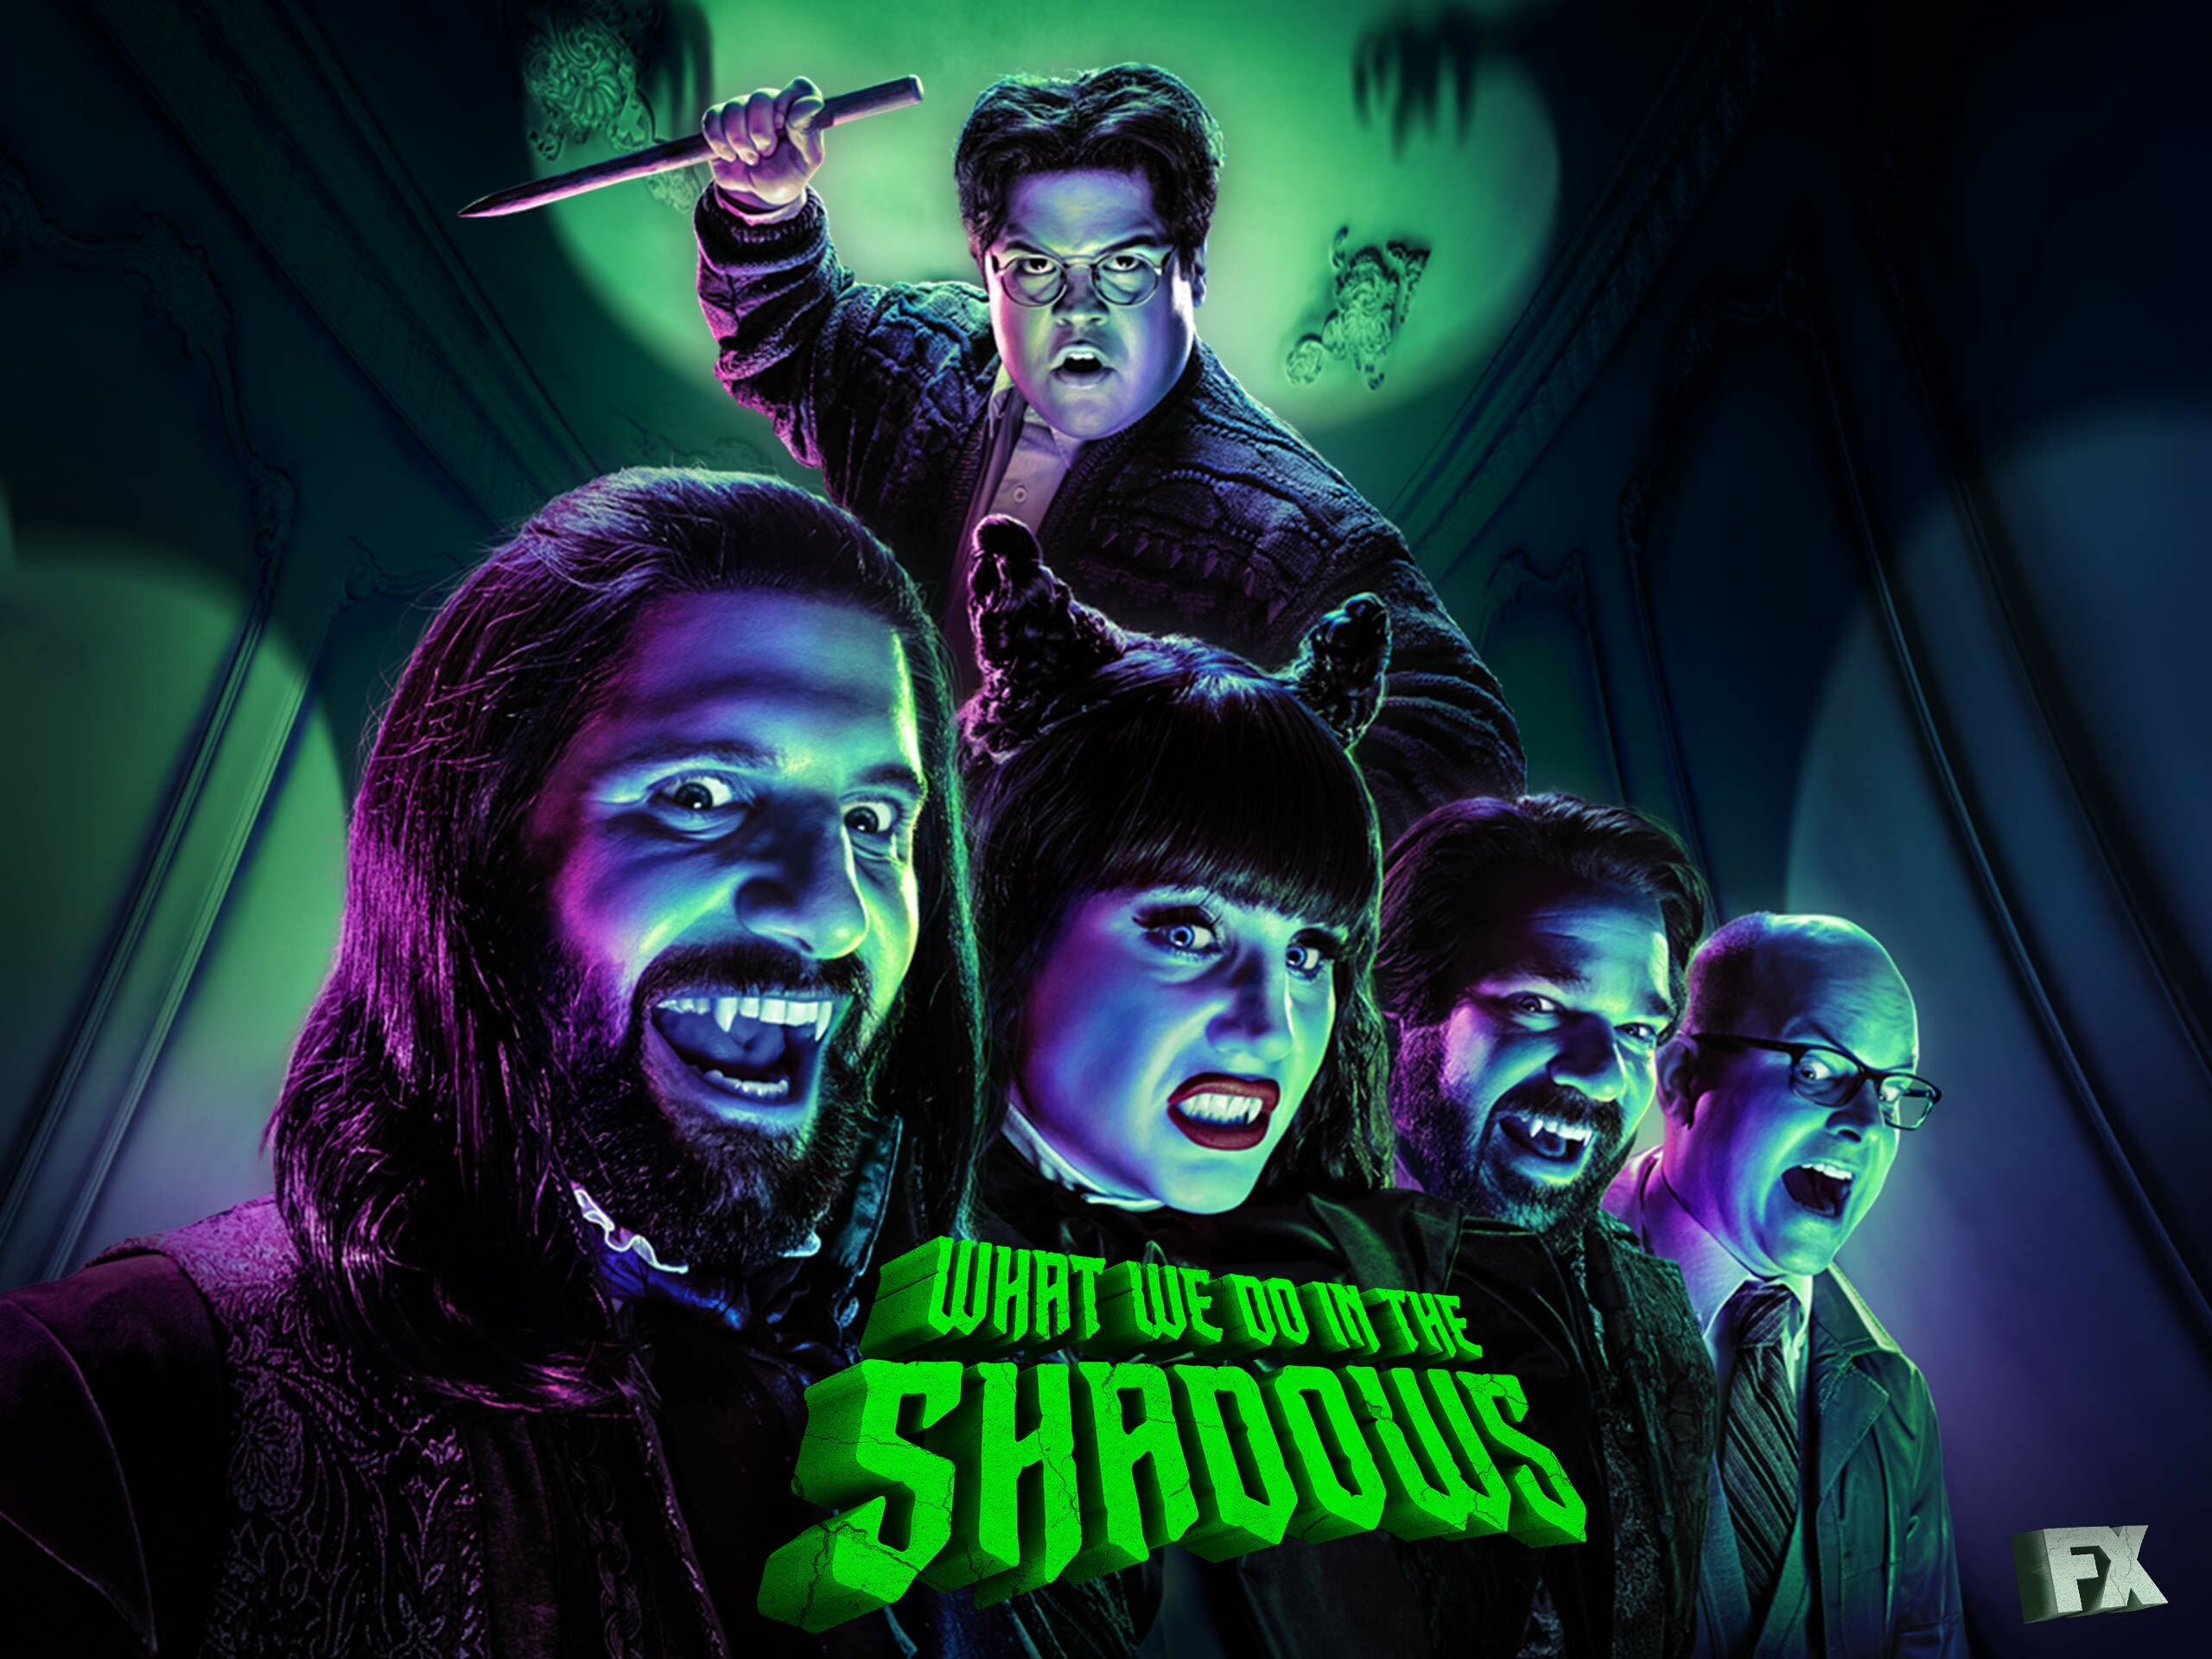 What We Do in the Shadows: The second television series in the franchise based on the 2014 New Zealand film of the same name. 2560x1920 HD Background.